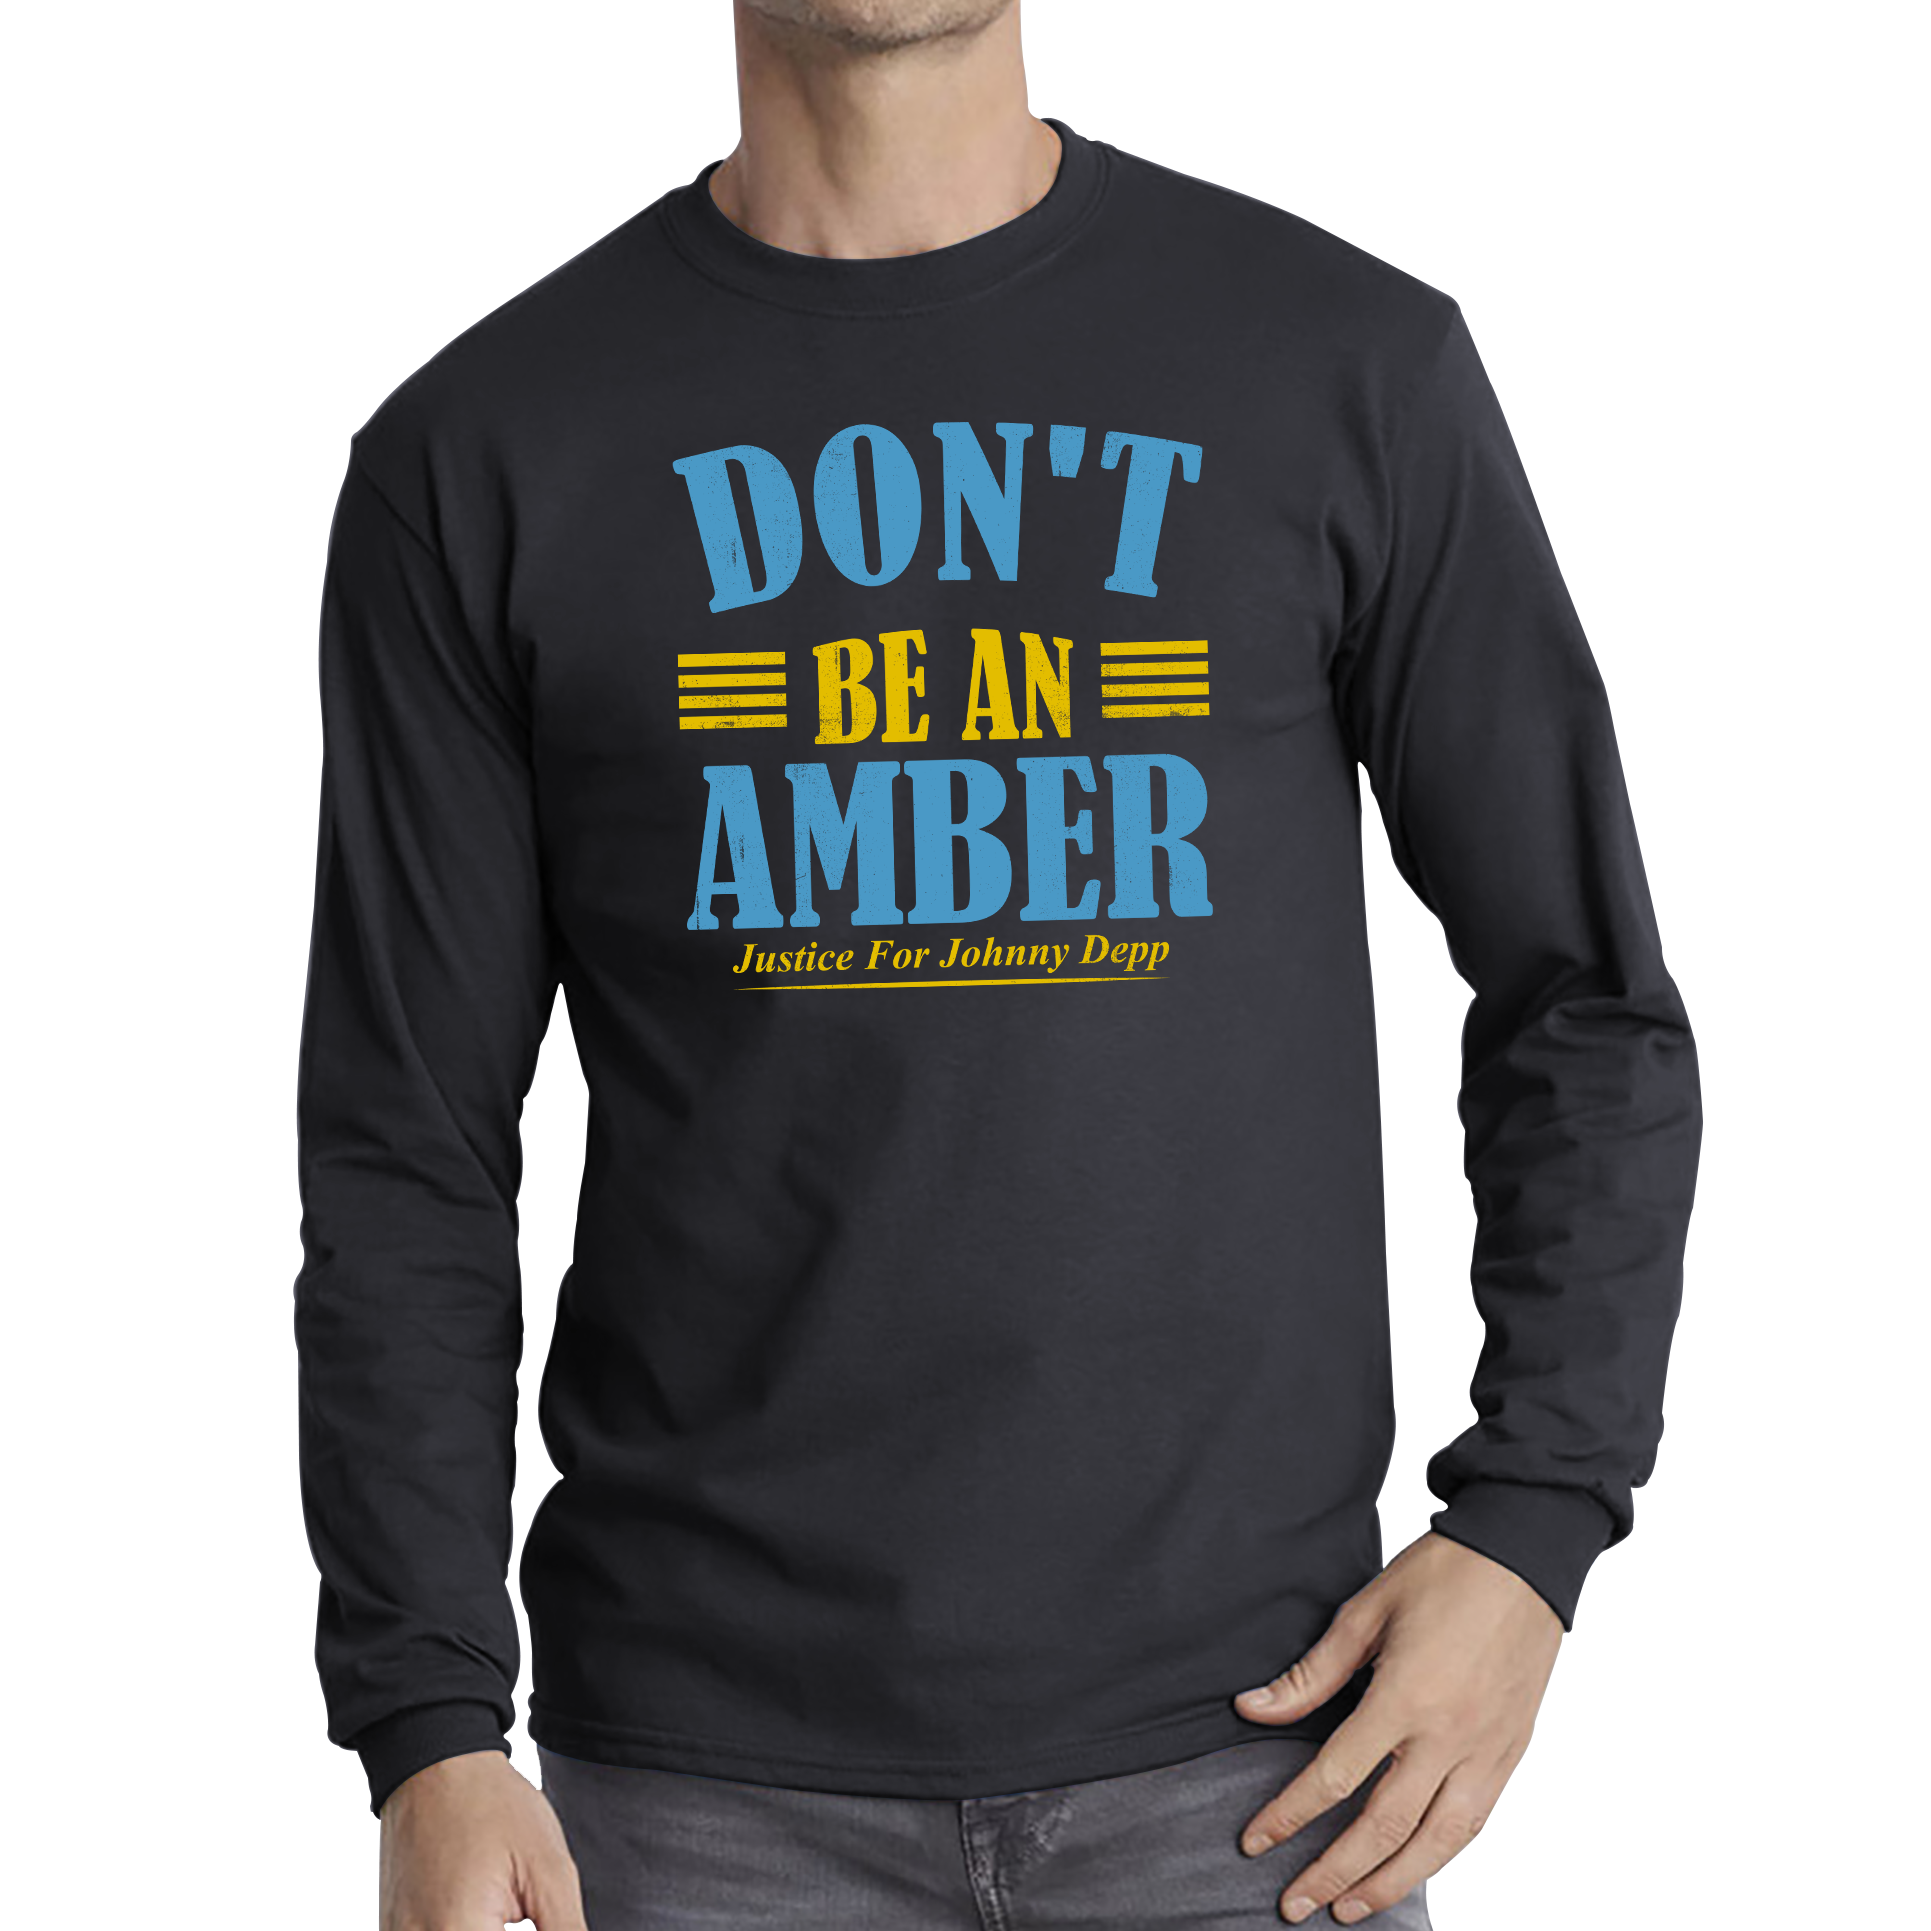 Don't Be An Amber Justice For Johnny Depp Shirt Stand With Johnny Depp Long Sleeve T Shirt